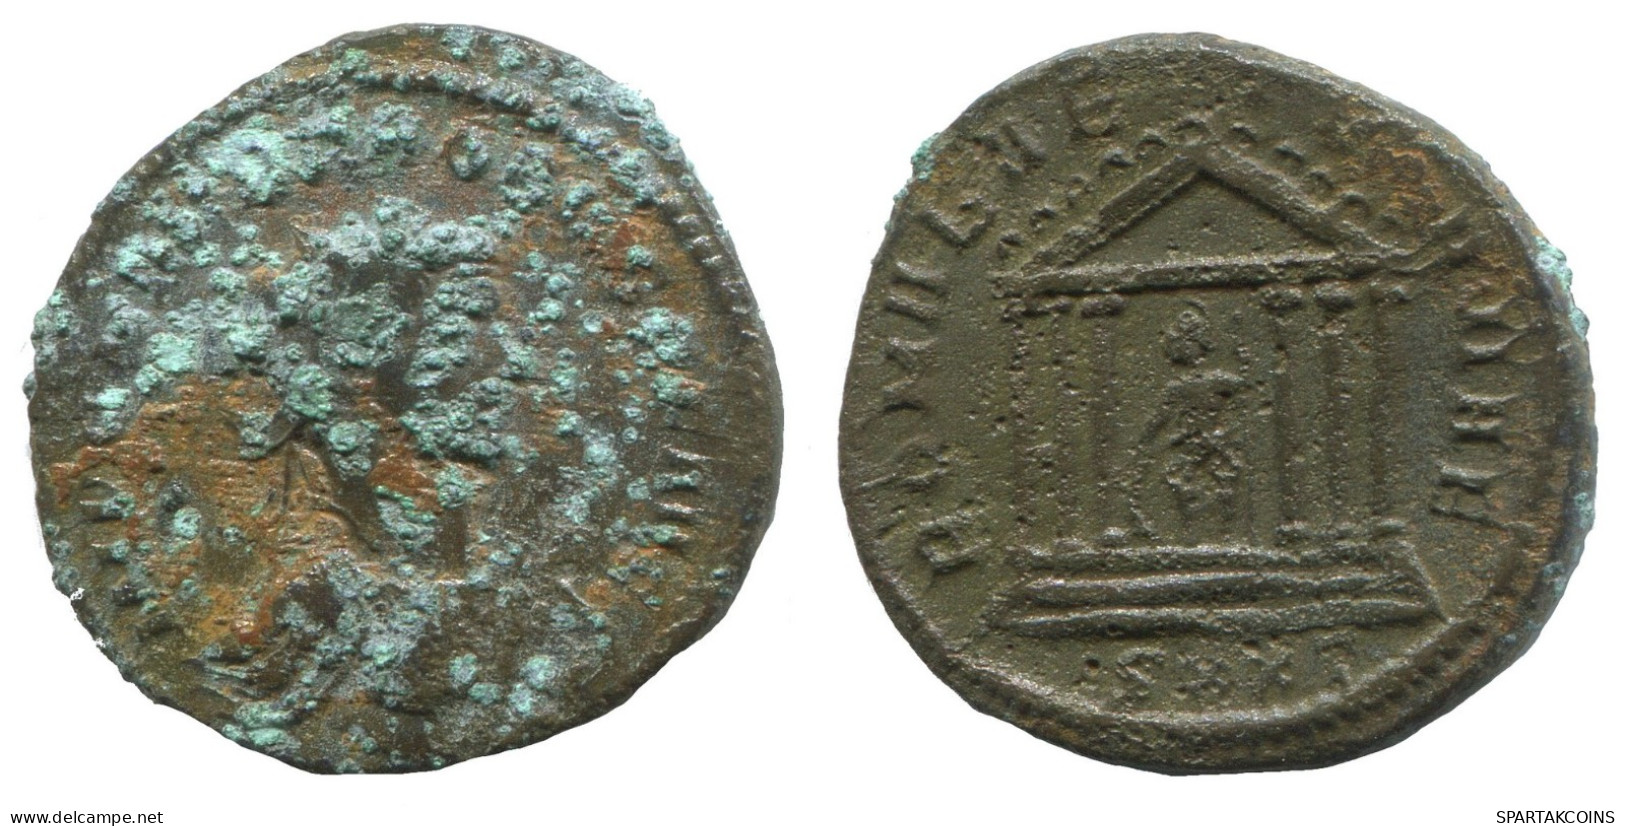 PROBUS ANTONINIANUS Ticinum Sxxt Romaeaeter Nae 3.8g/23mm #NNN1683.18.F.A - The Military Crisis (235 AD To 284 AD)